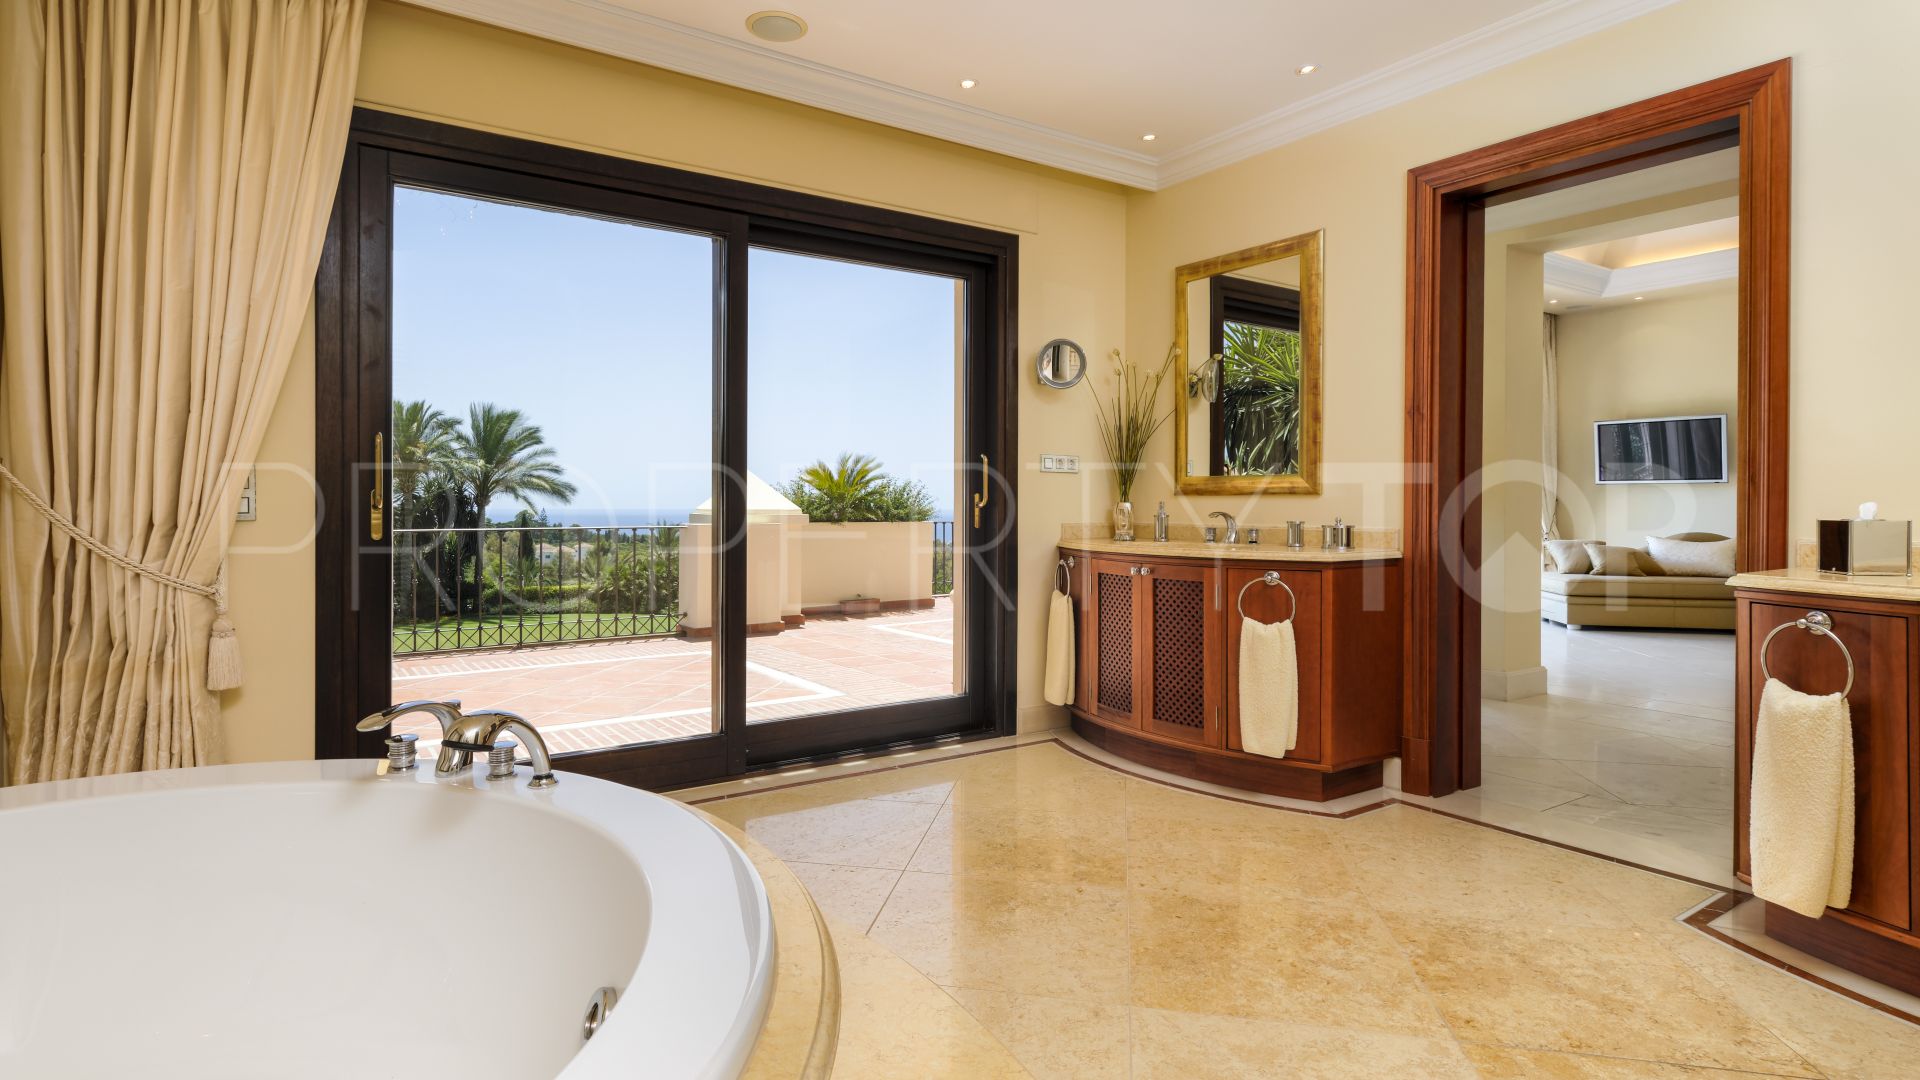 For sale villa in Marbella Hill Club with 5 bedrooms